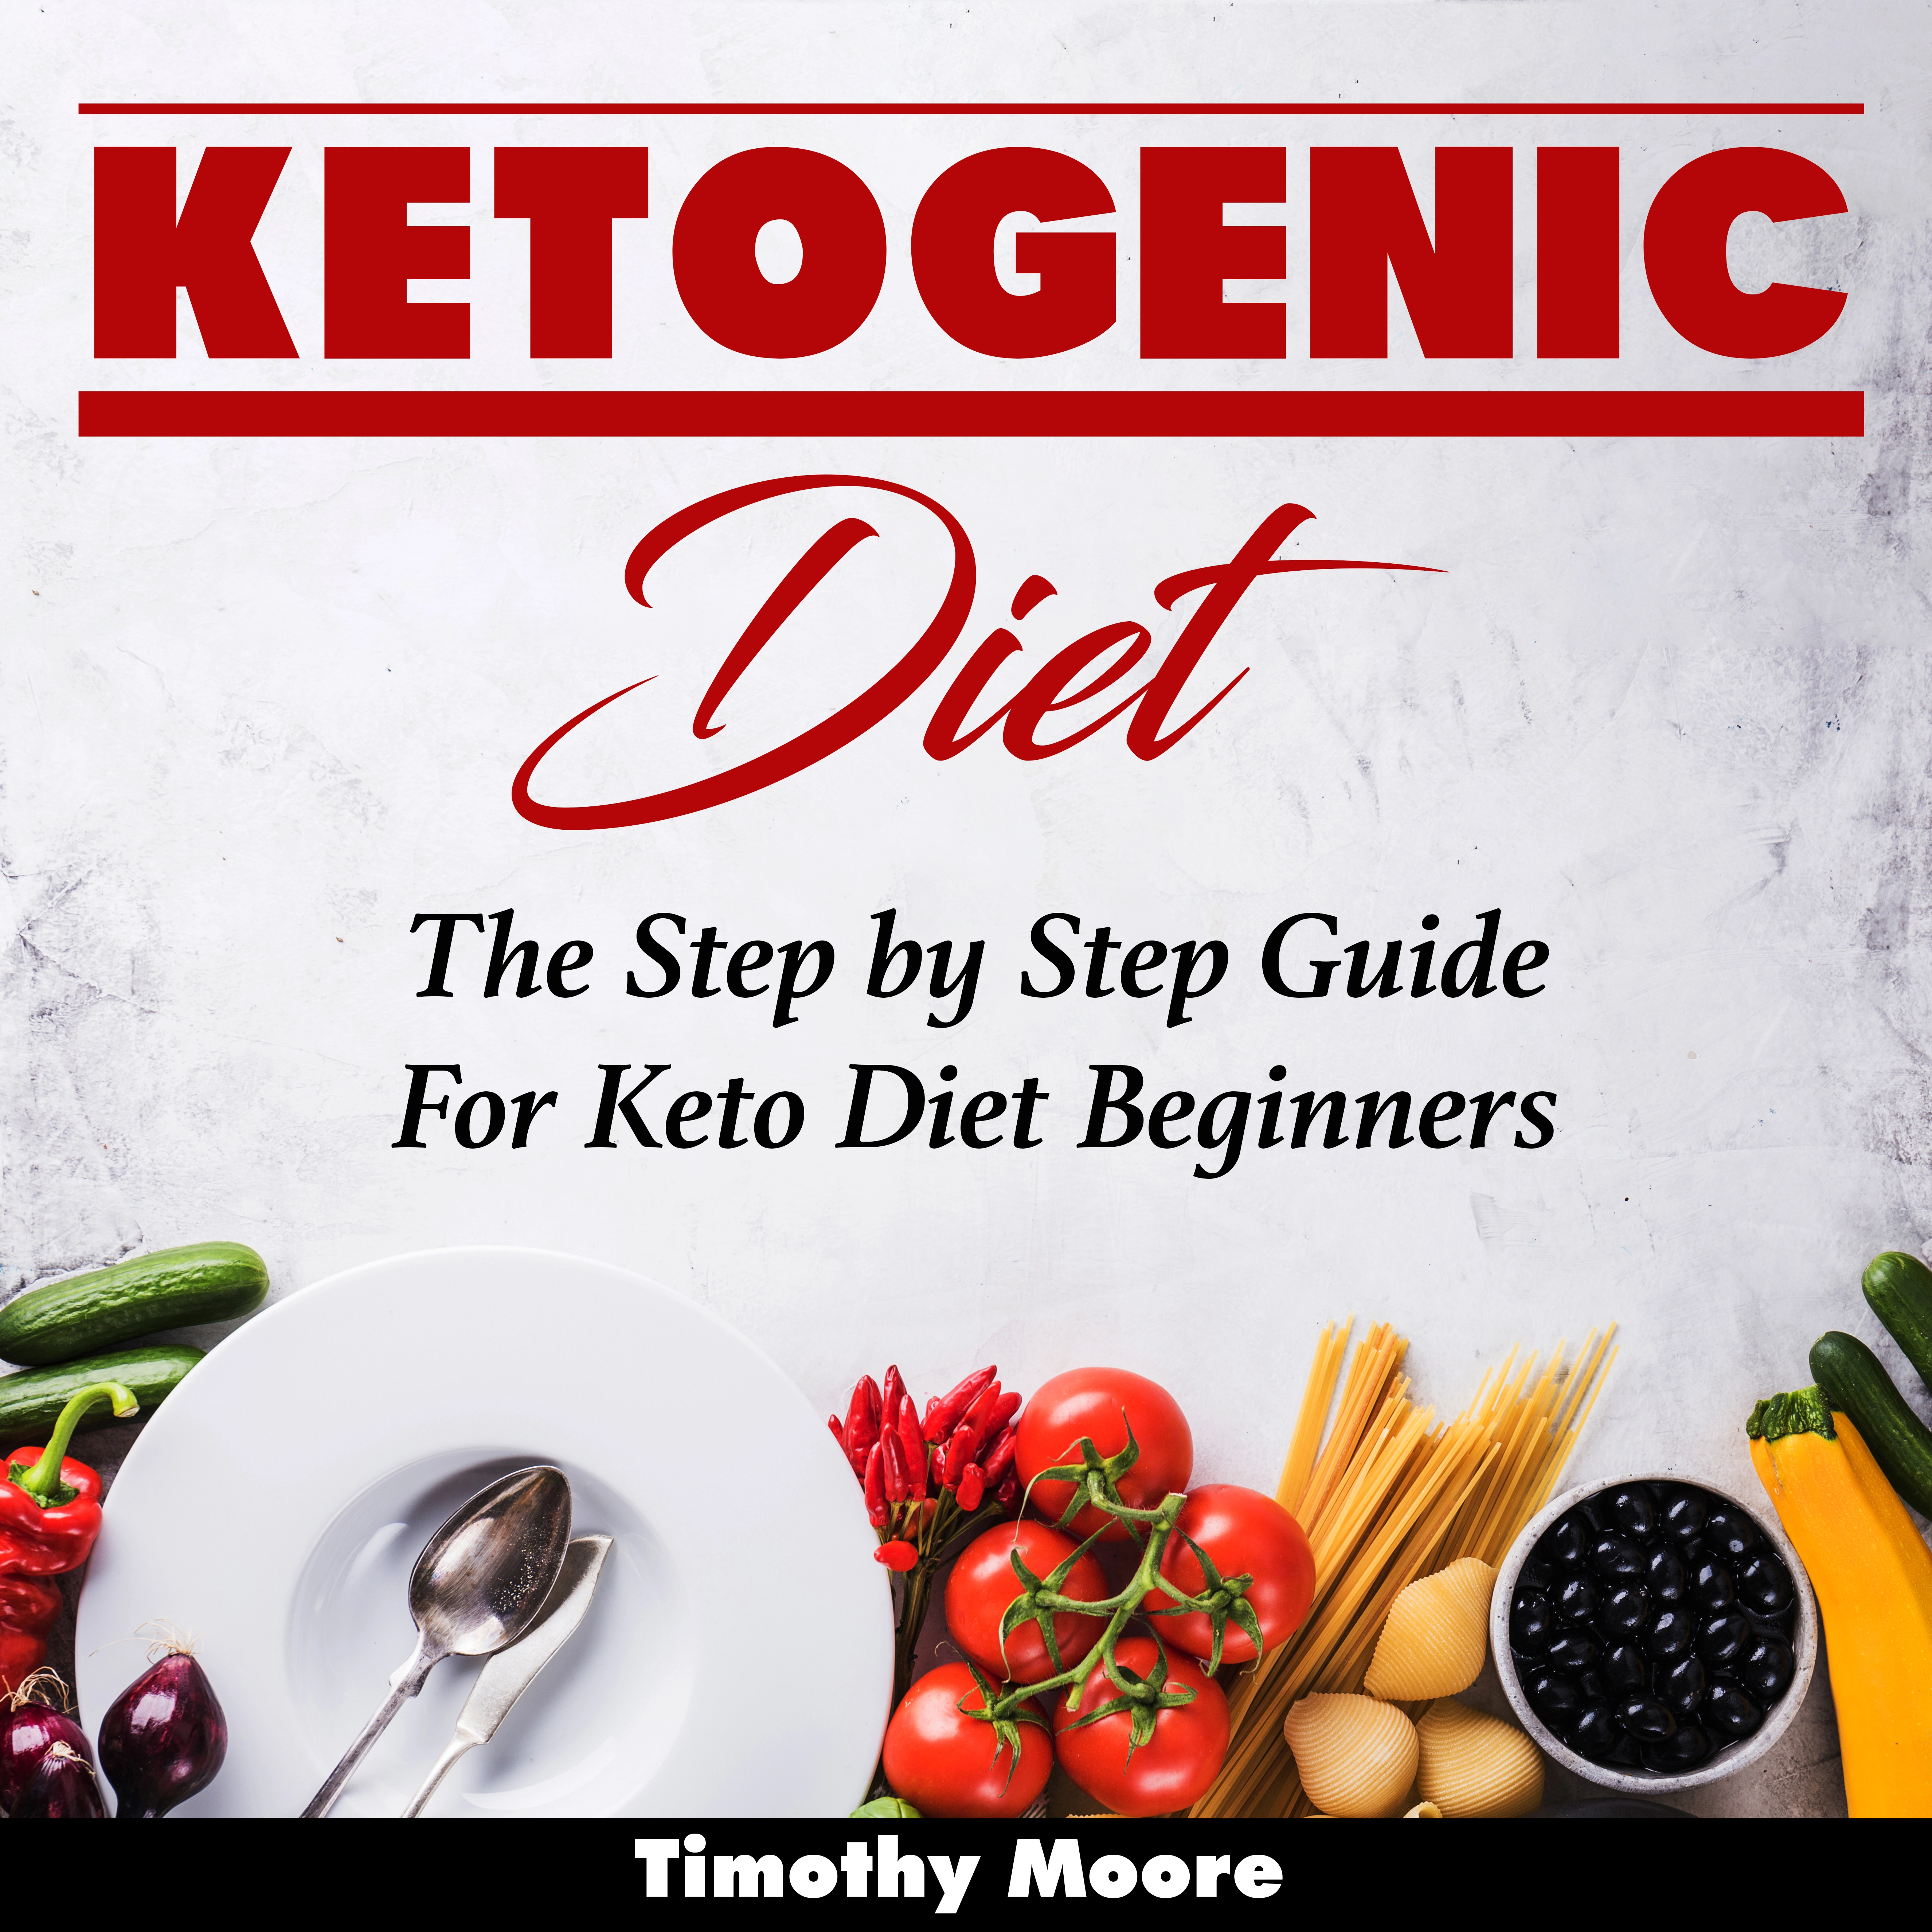 Ketogenic Diet: The Step by Step Guide For Keto Diet Beginners Audiobook by Timothy Moore